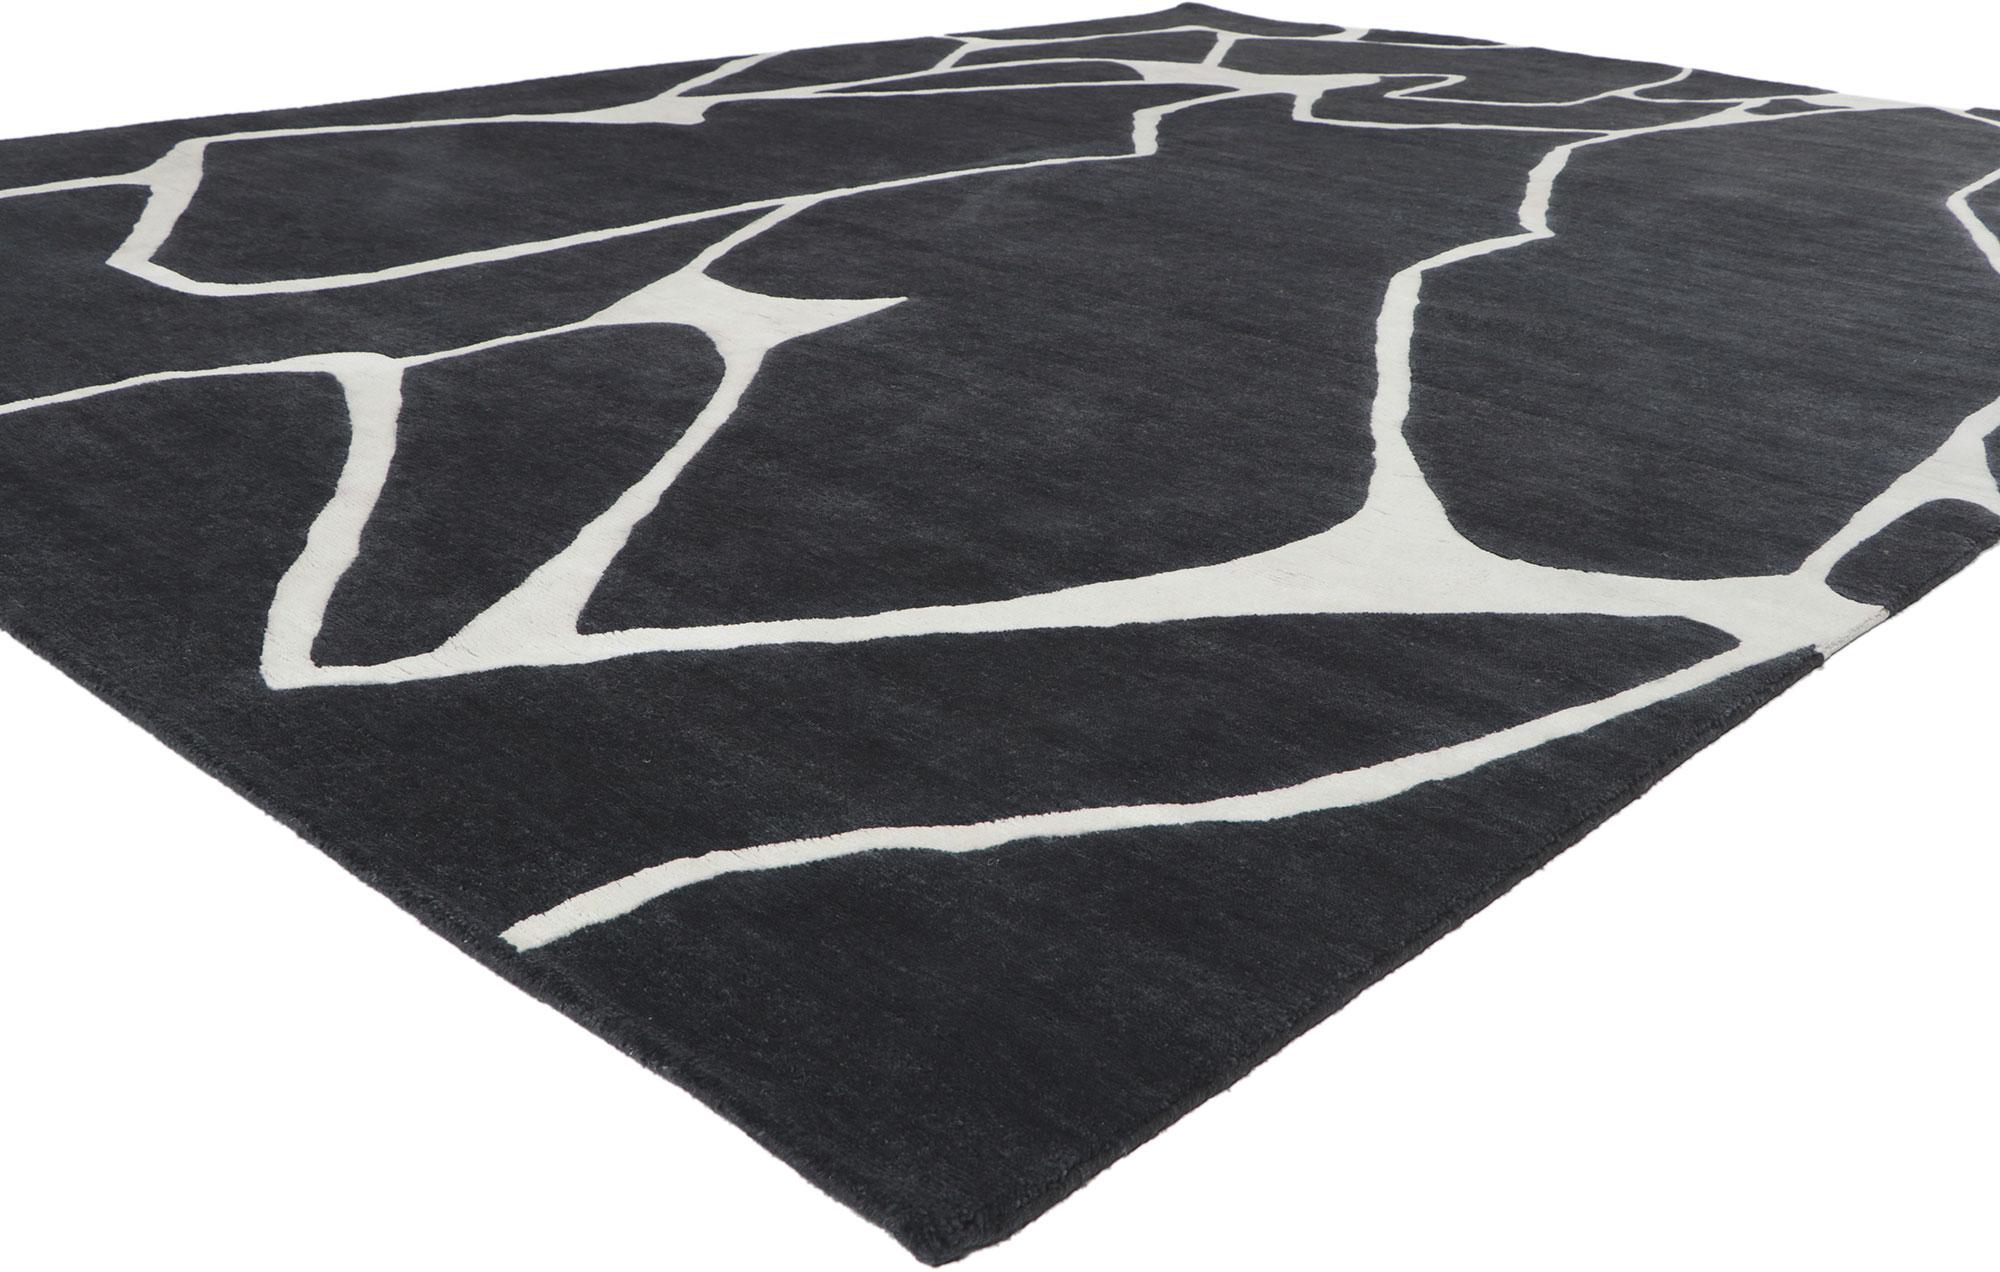 30877 new Contemporary abstract rug, 09'02 x 12'01.
Showcasing conceptual style, incredible detail and texture, this hand knotted contemporary abstract rug pushes the boundaries of design. The mesmerizing abstract pattern and atmospheric colorway